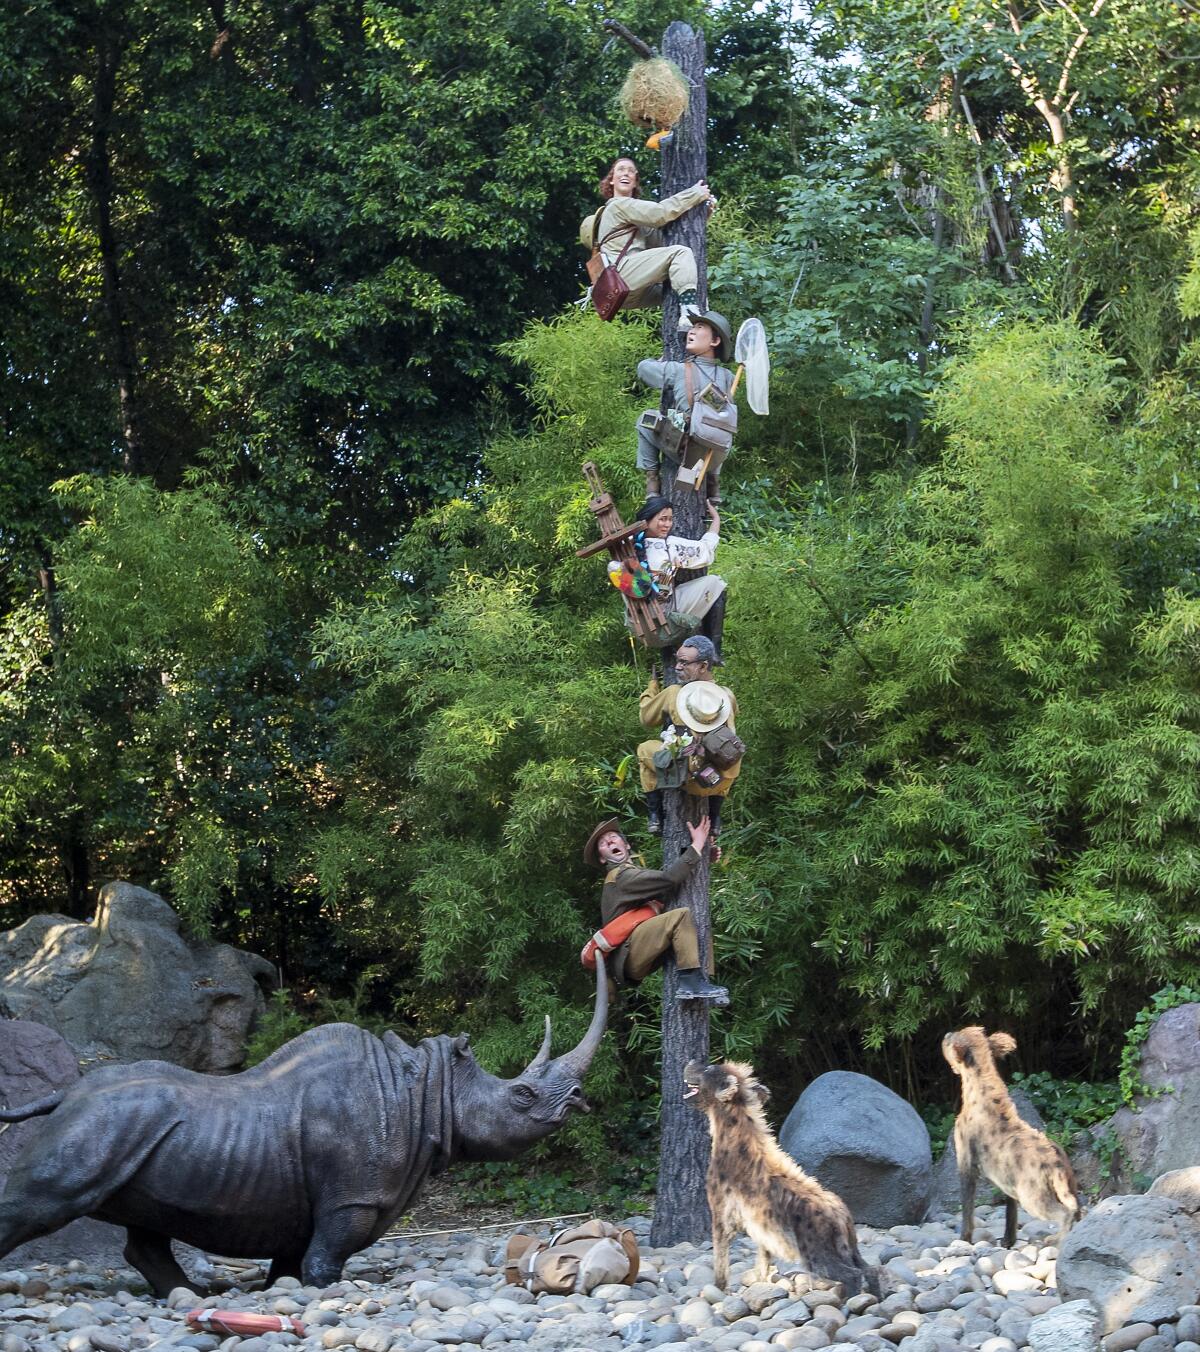 Animals have an explorer treed in a Jungle Cruise scene